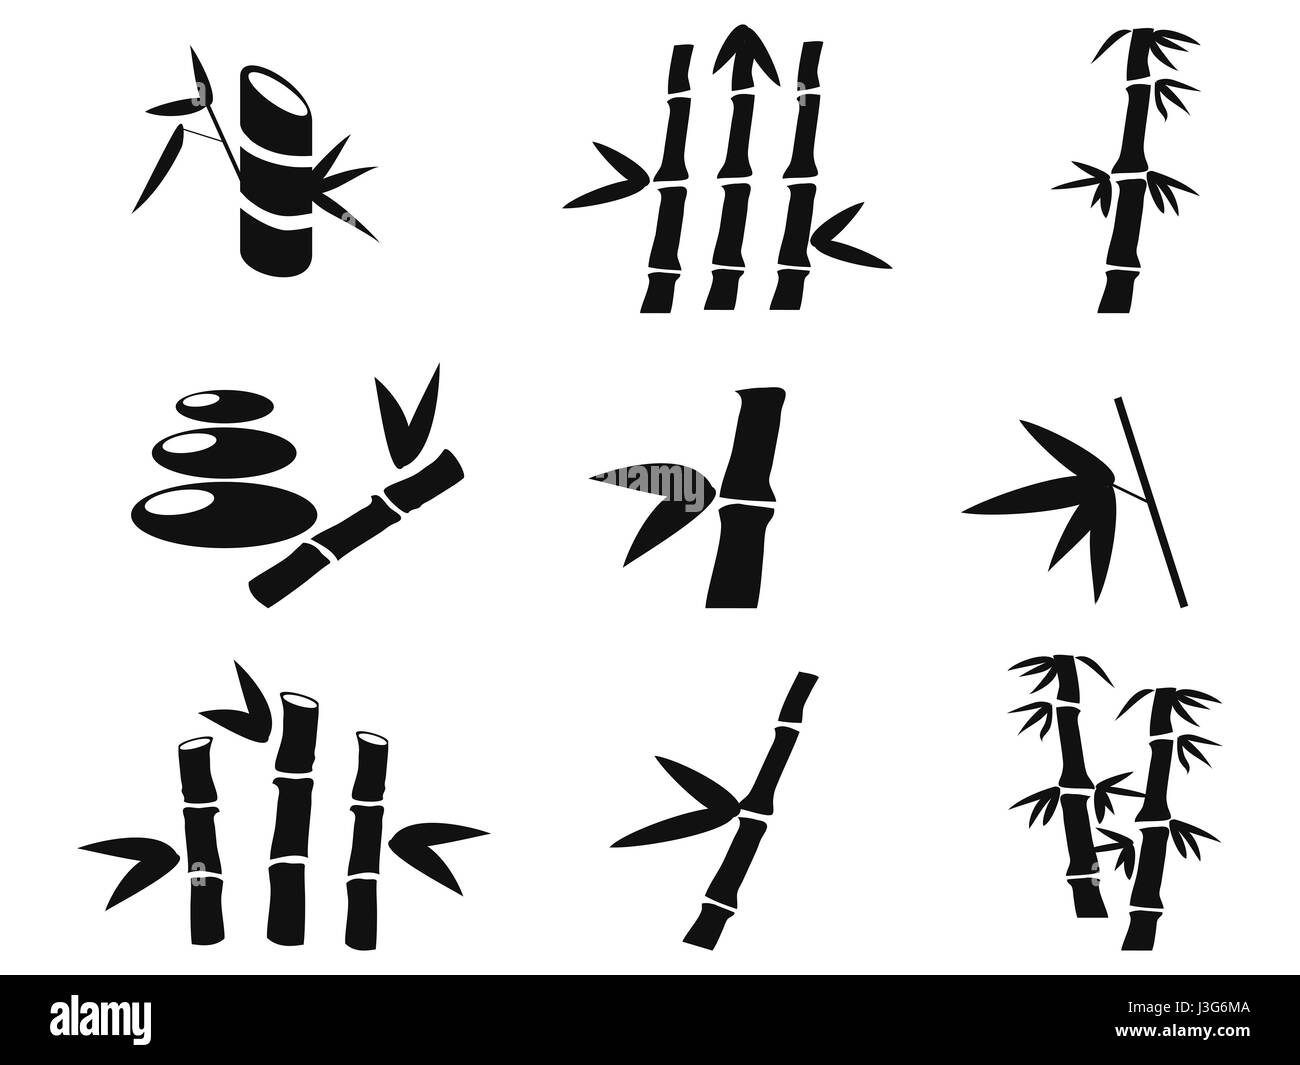 isolated black bamboo icons from white background Stock Photo